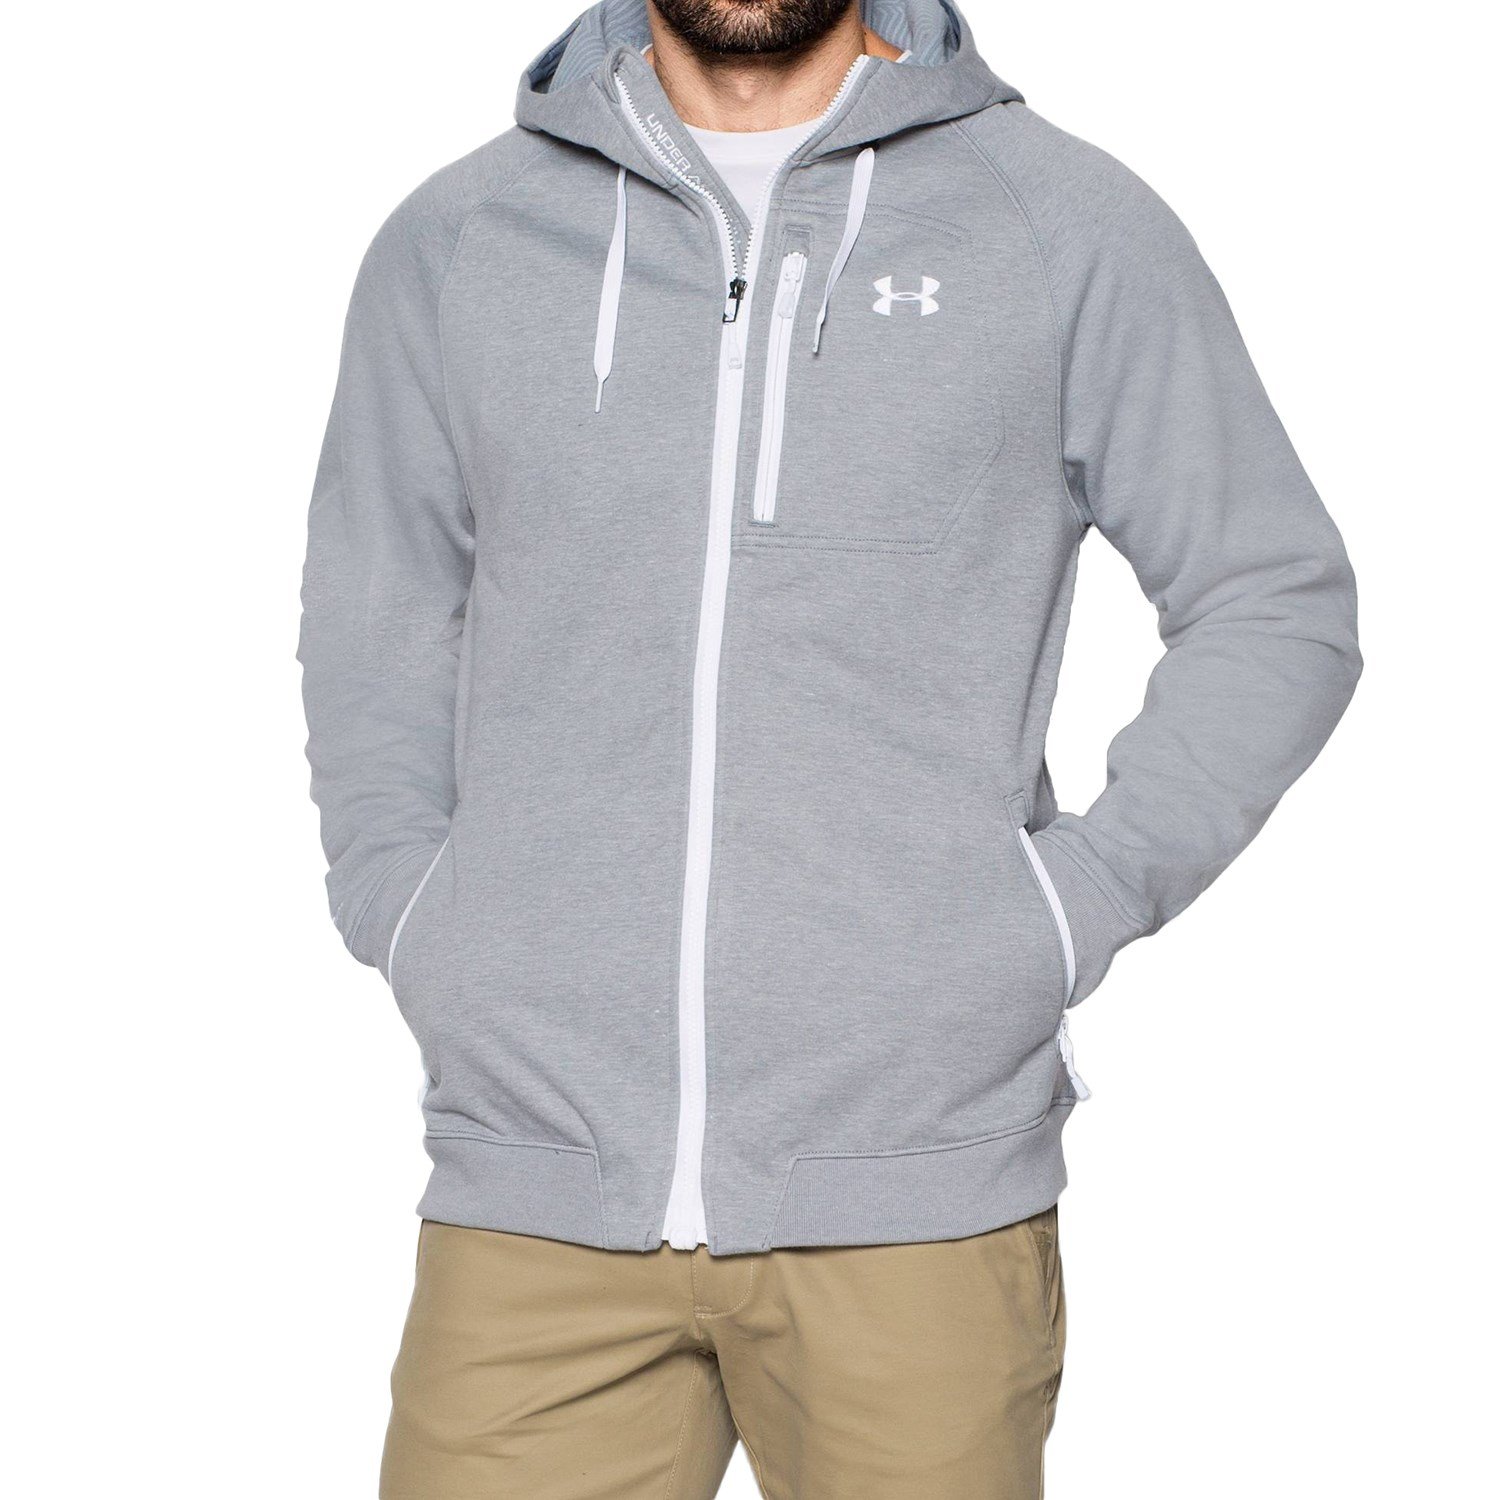 https://images.evo.com/imgp/zoom/93985/416965/under-armour-coldgear-infrared-dobson-softershell-hoodie-.jpg